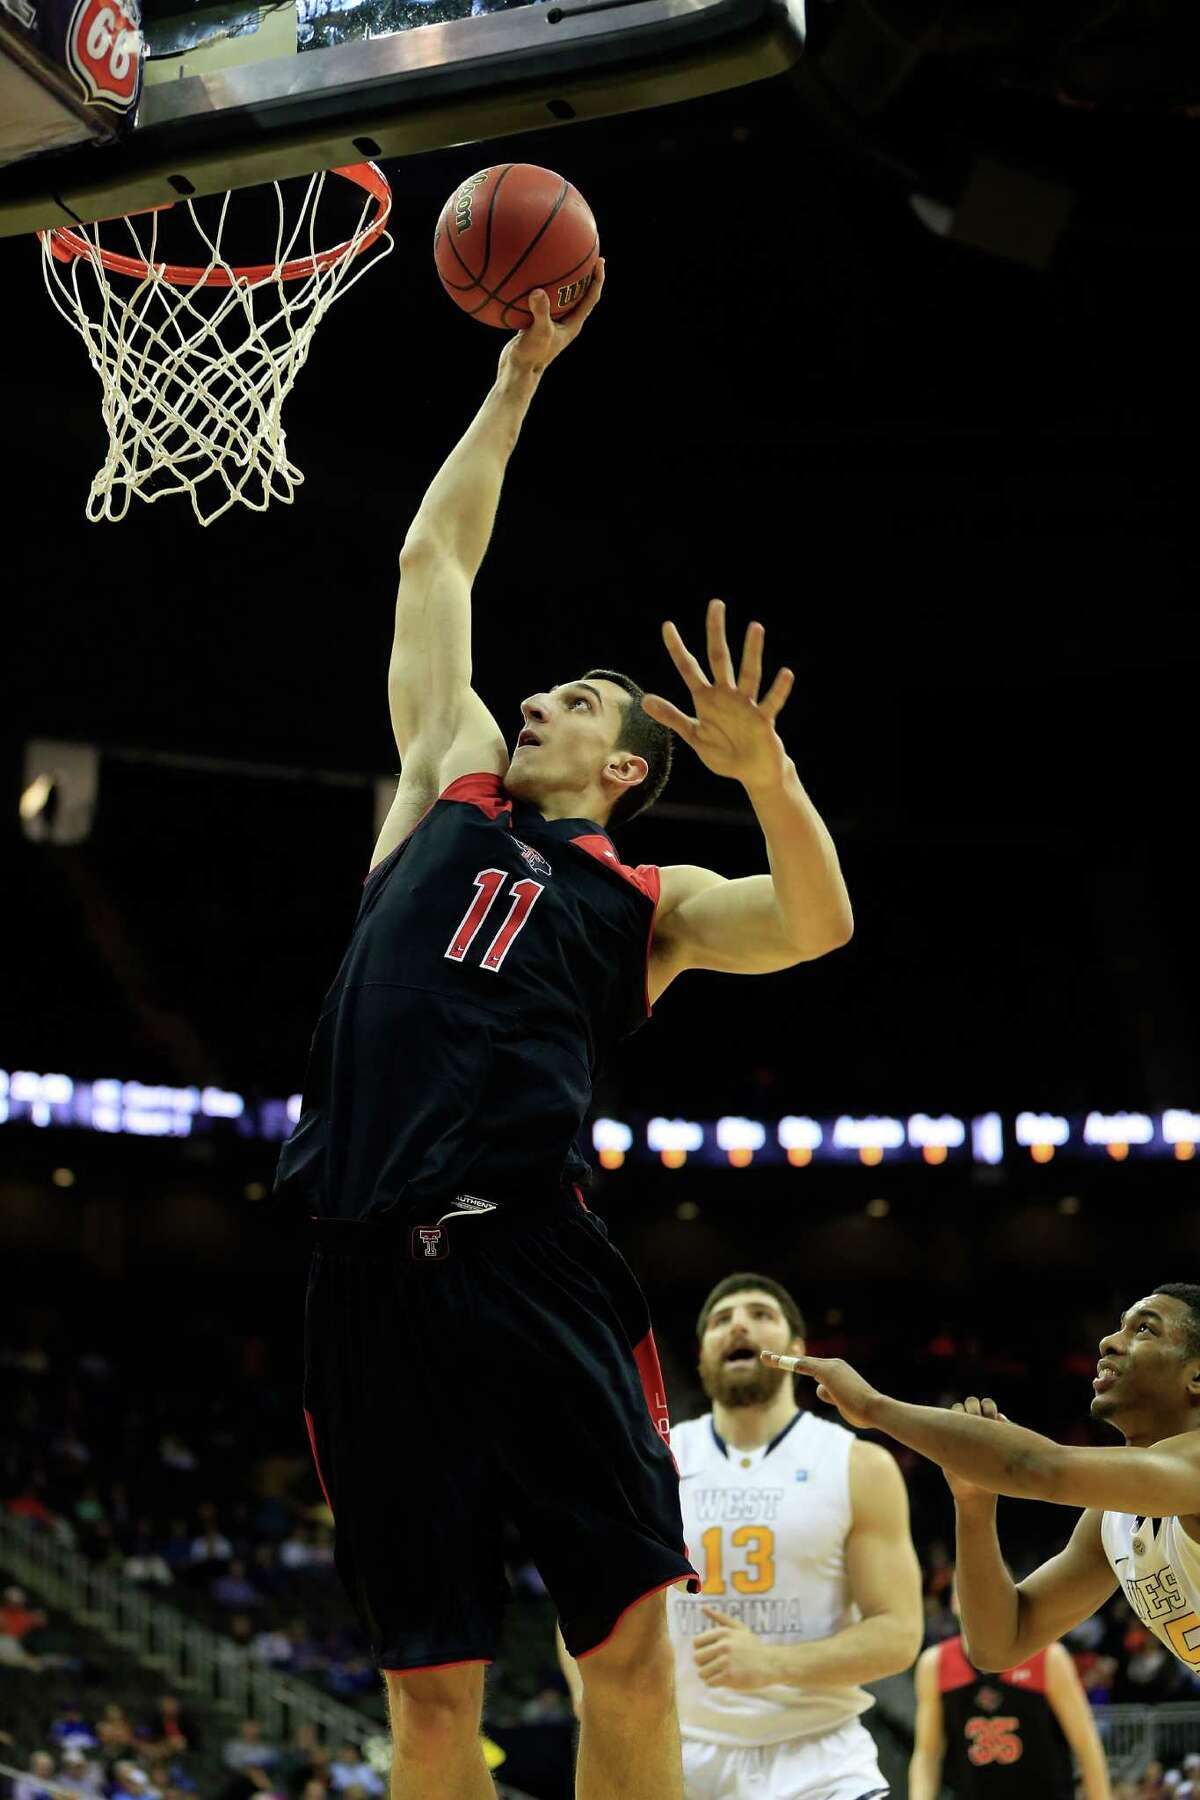 KANSAS CITY, MO - MARCH 13: Dejan Kravic #11 of the Texas Tech Red Raiders shoots during the game as the Red Raiders defeat the West Virginia Mountaineers 71-69 to win their first round game of the 2013 Big 12 Men's Basketball Championship at Sprint Center on March 13, 2013 in Kansas City, Missouri. (Photo by Jamie Squire/Getty Images)